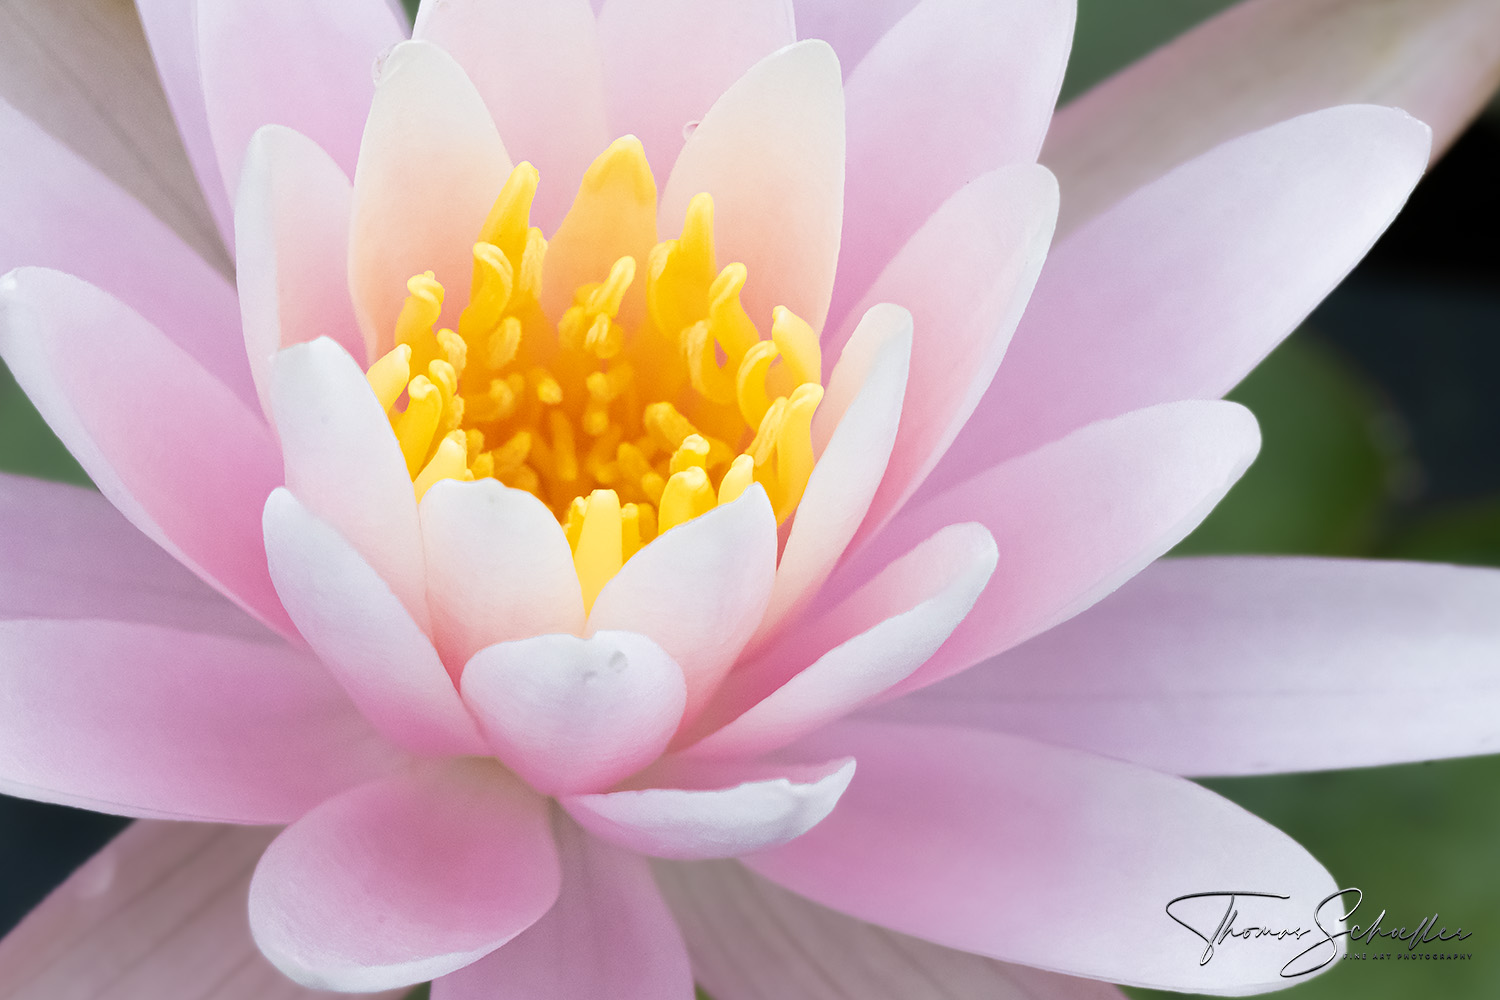 Wild Blooming Pink Lotus Flower Luxury Art Edition - The Symbol of Spiritual Enlightenment | Photographic Nature Art provides health benefits 